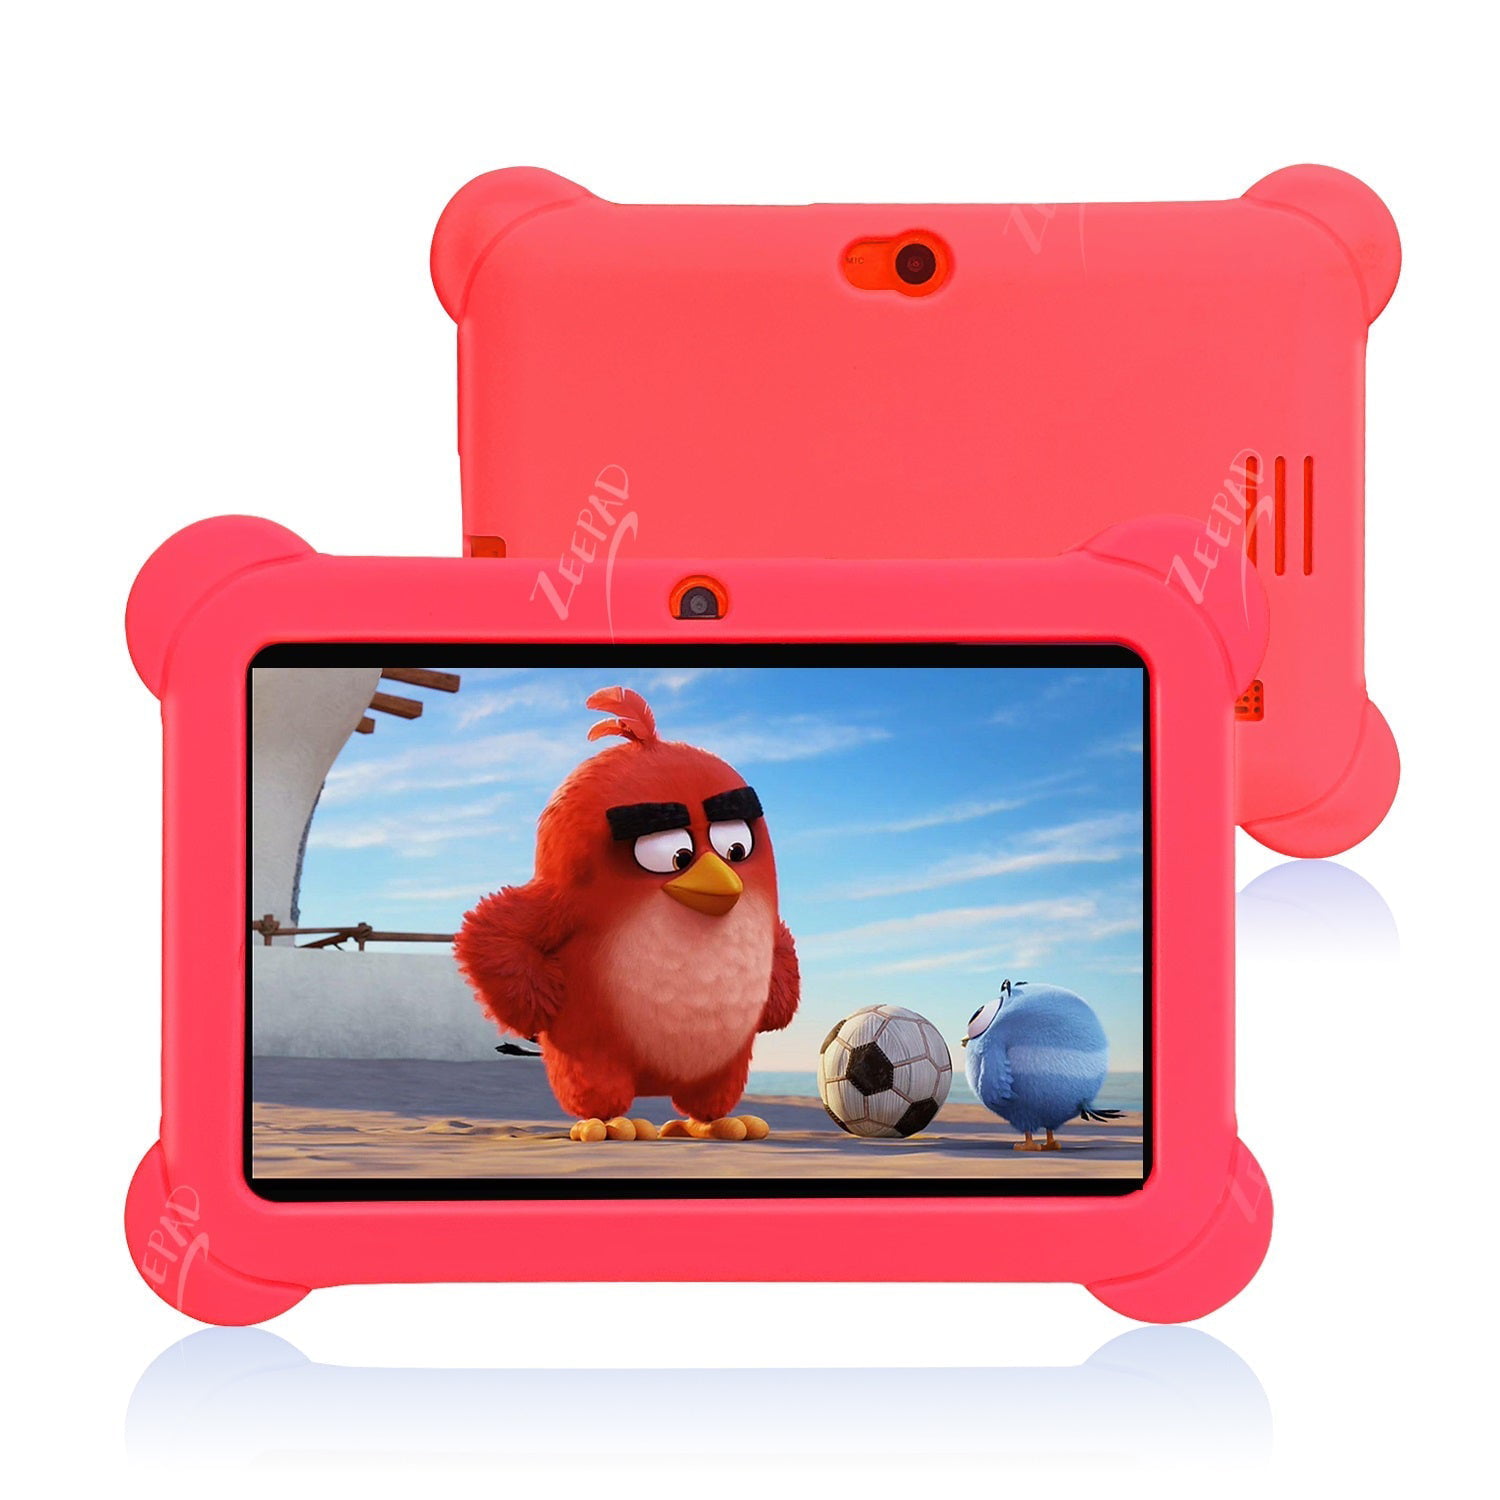 WorryFree Gadgets 7 Kids Tablet Computer, Android 7.1, Quad Core CPU, 8GB  Hard Drive, Pre-Installed Games and Apps, Wi-Fi, Dual Camera - Pink